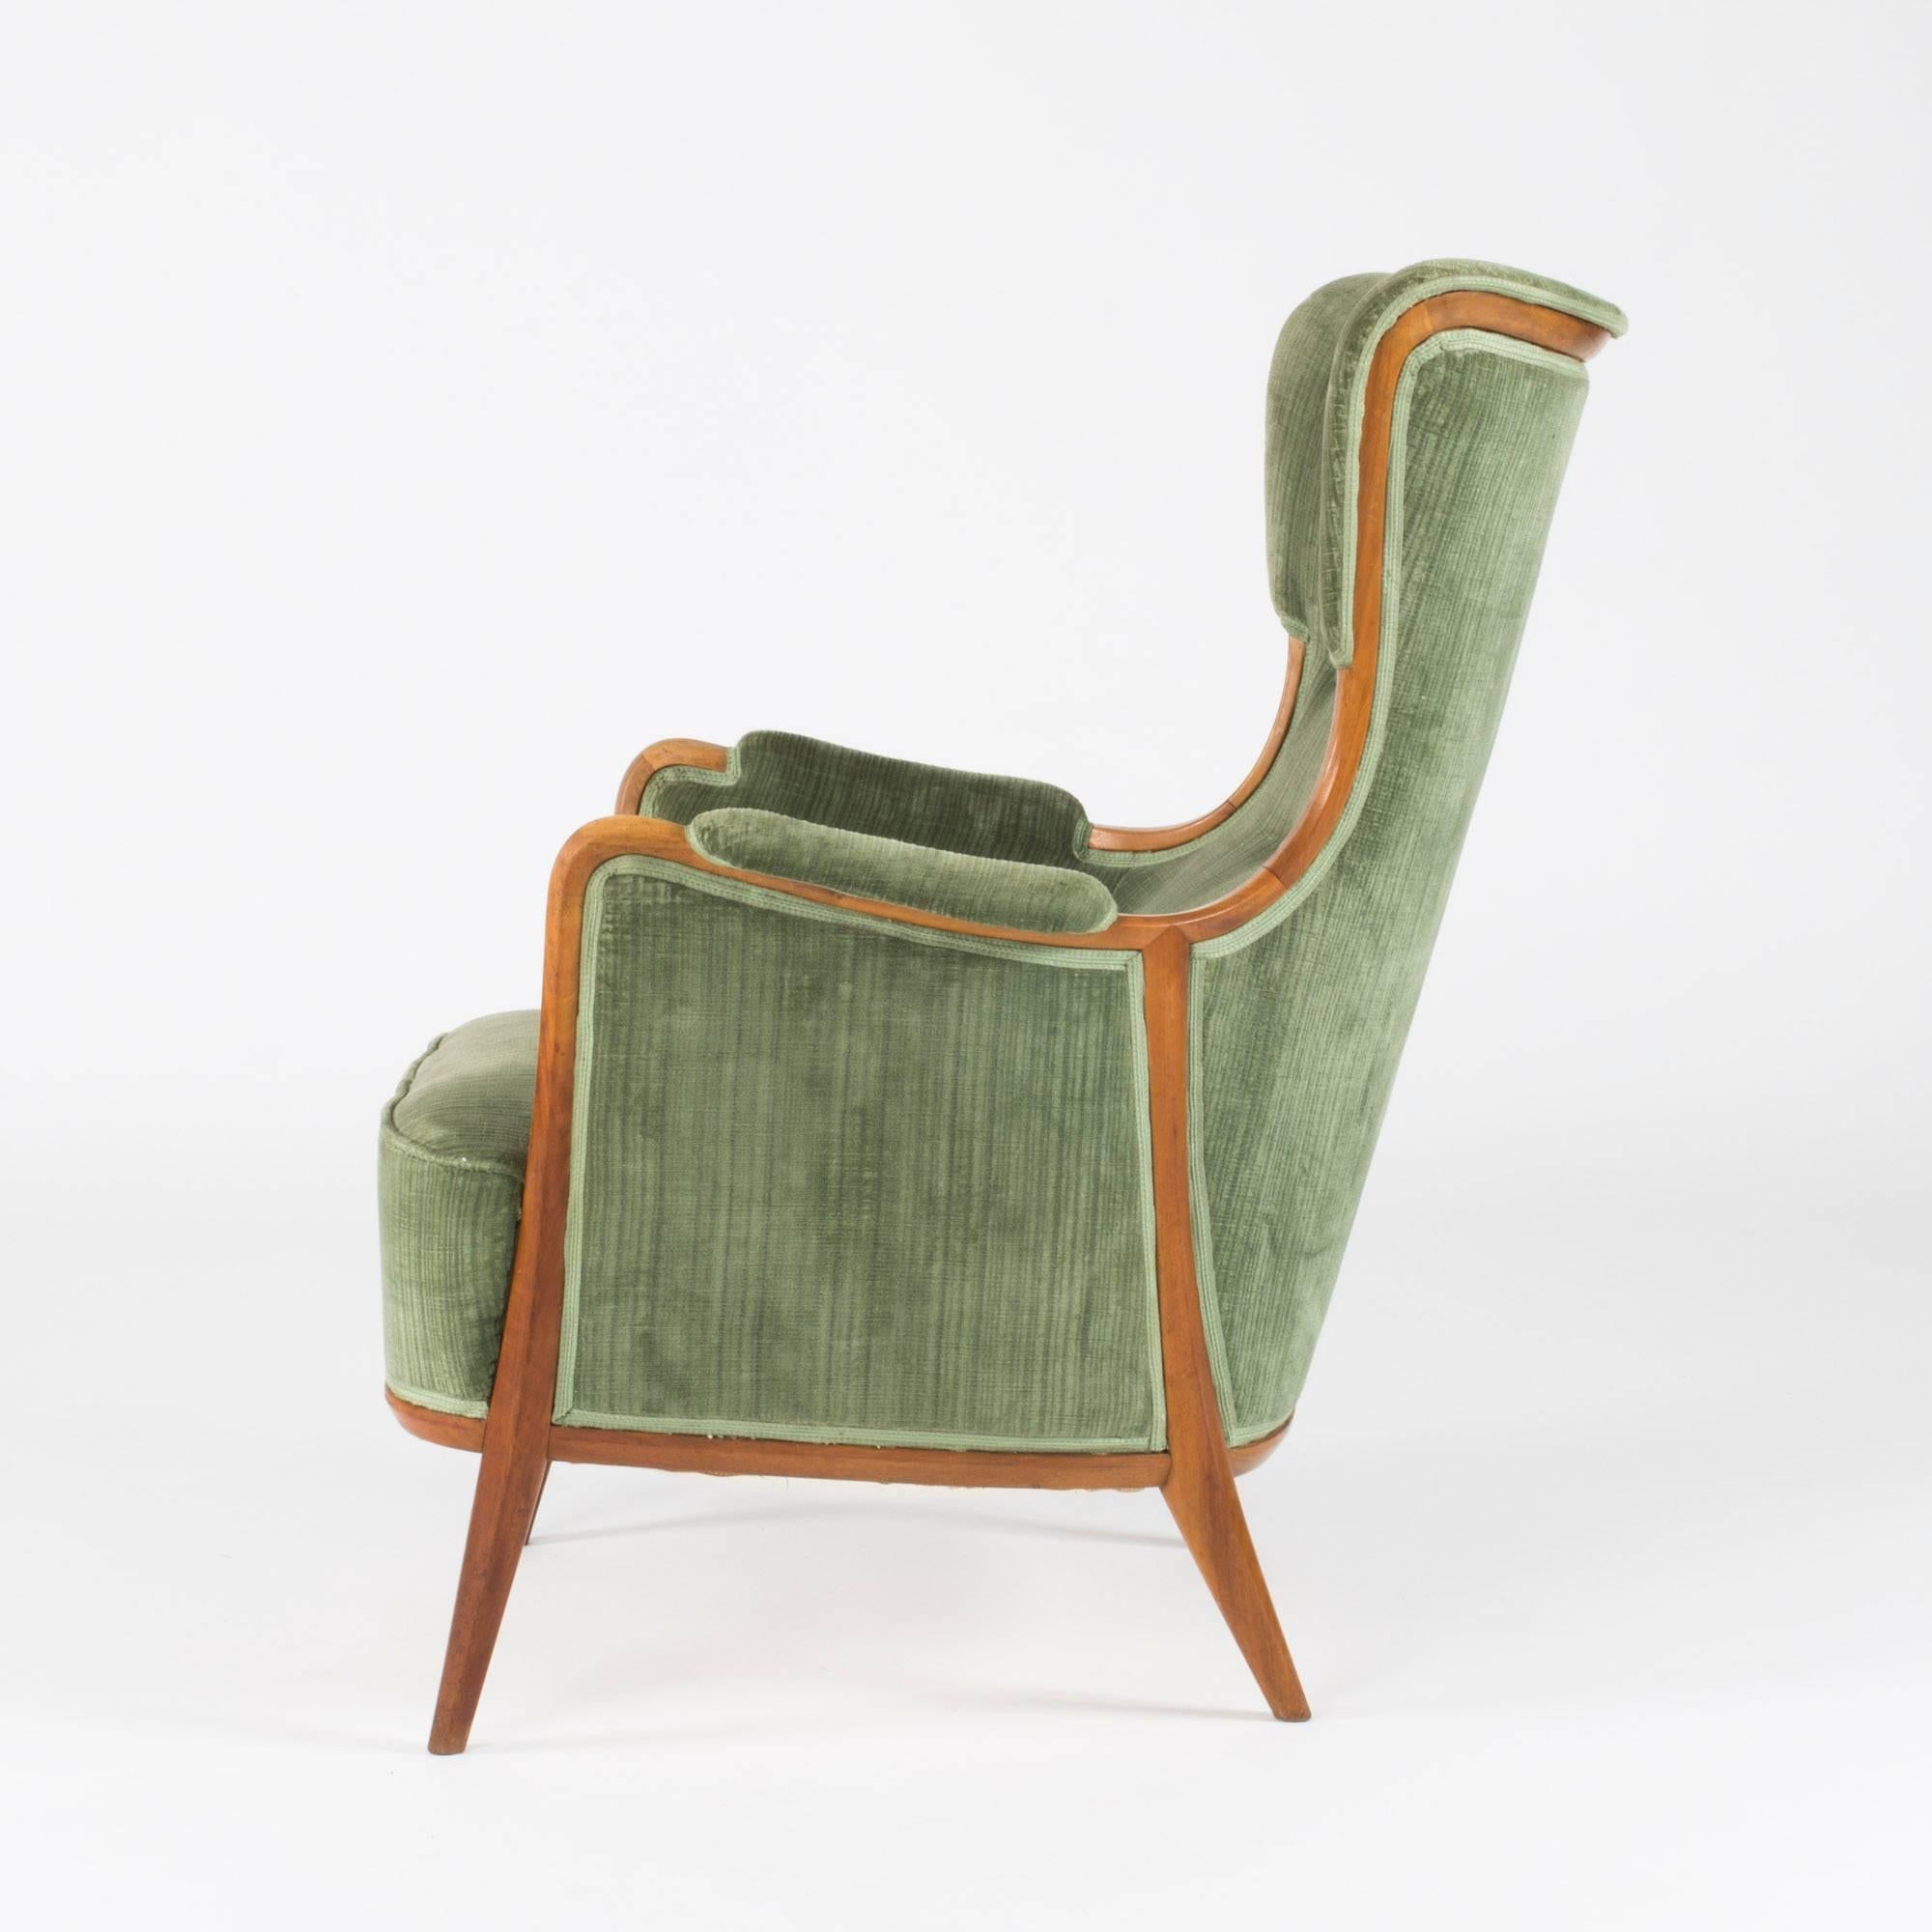 Elegant lounge chair designed by Axel Larsson, executed by master carpenter Hjalmar Jacksson at Stockholms Hantverksförening. Frame made from walnut with a decor of walnut along the edges and forming a pattern on the sides. Original, green velvet